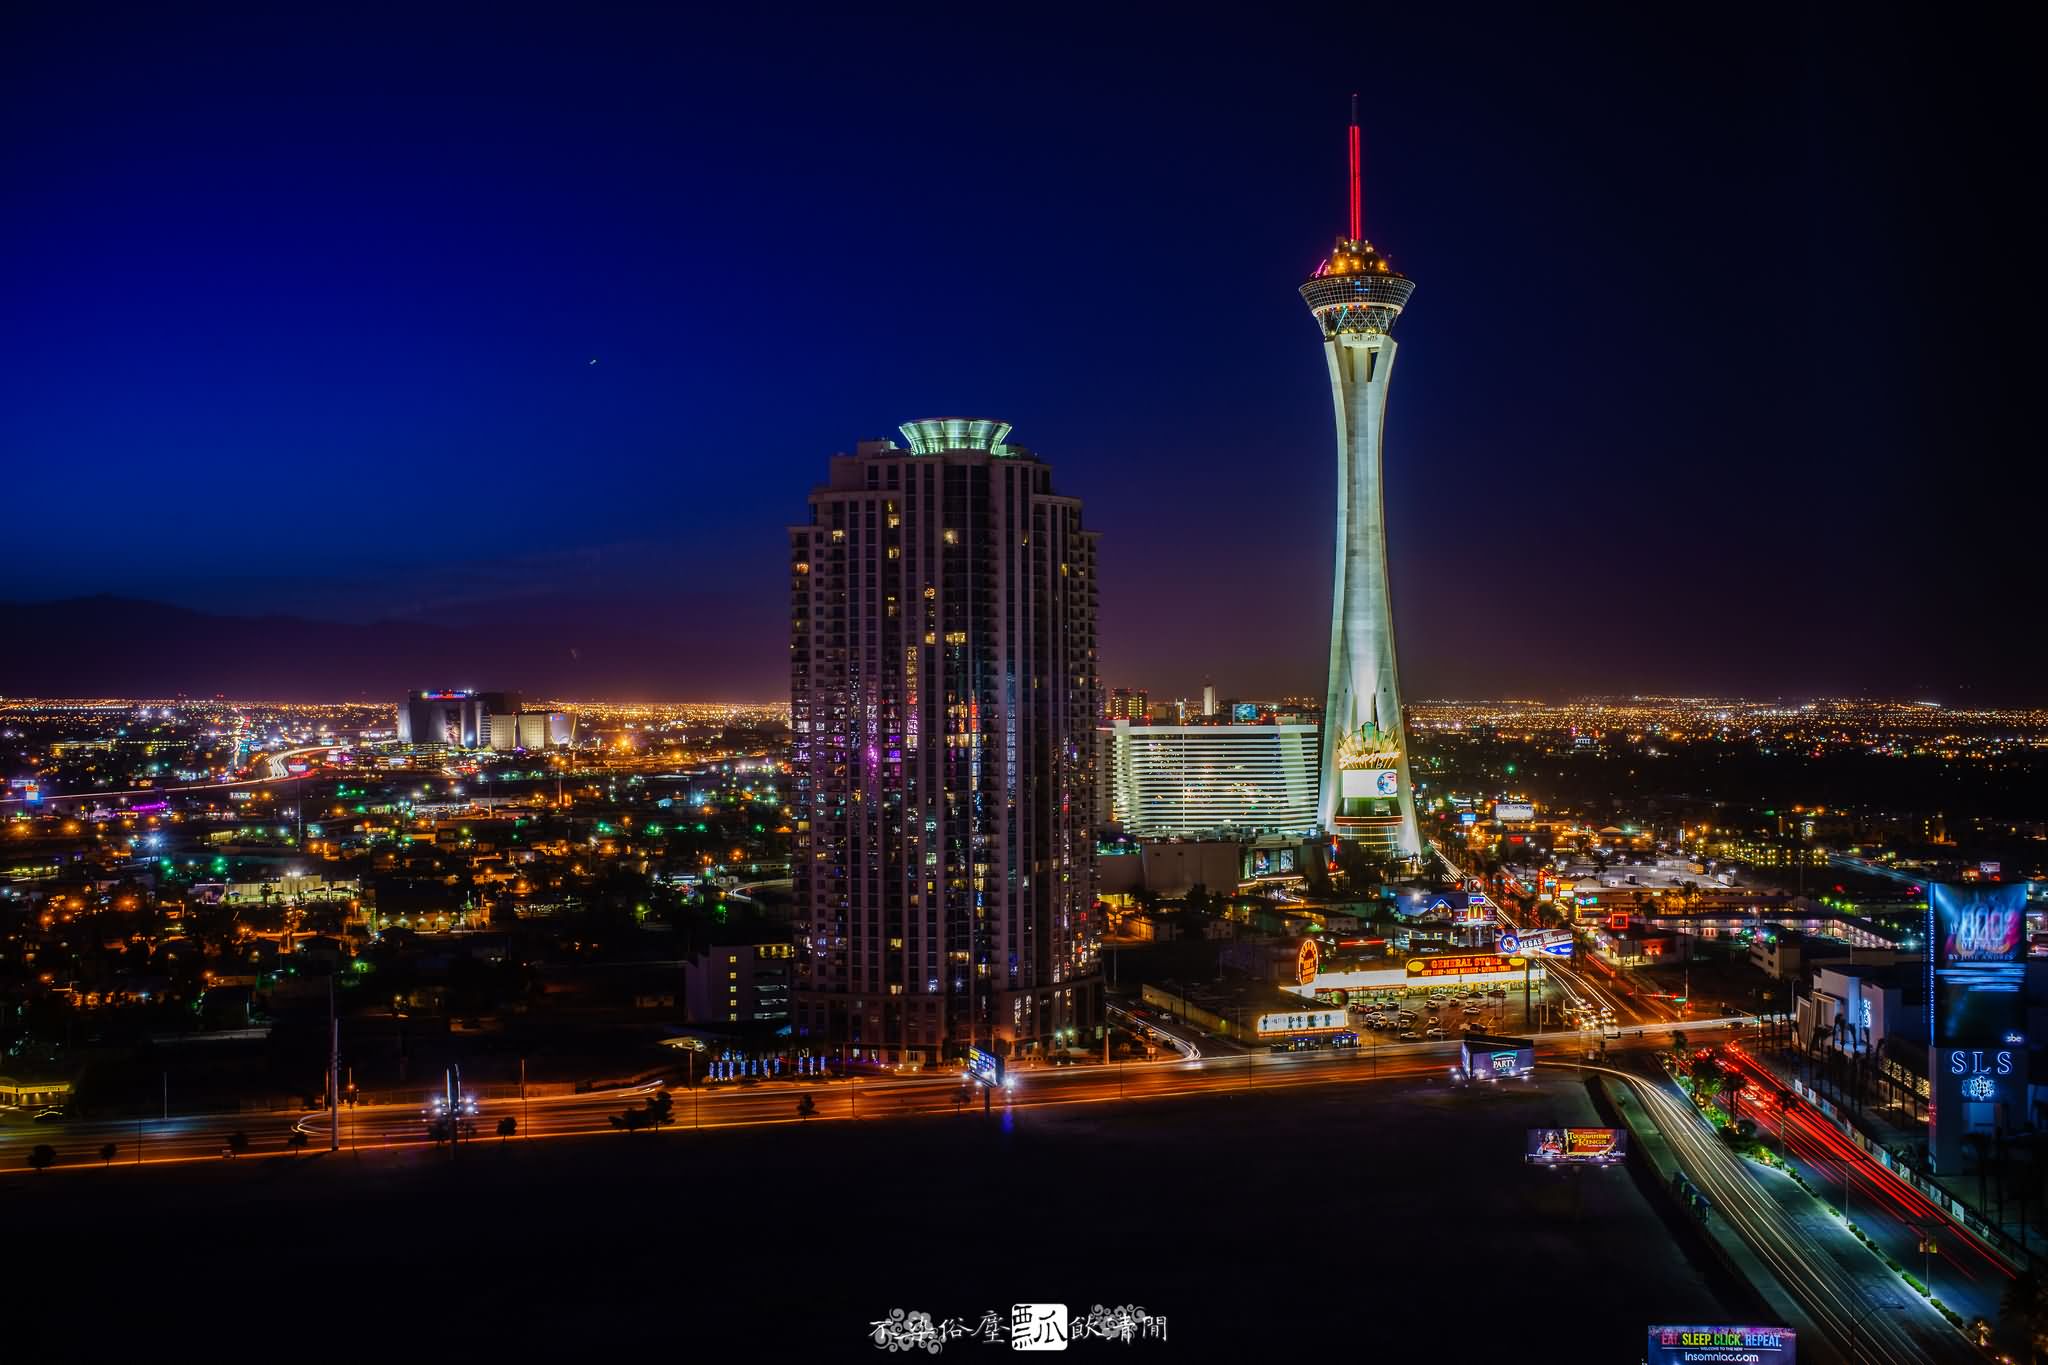 Beautiful View Of The Stratosphere Tower With Night Lights